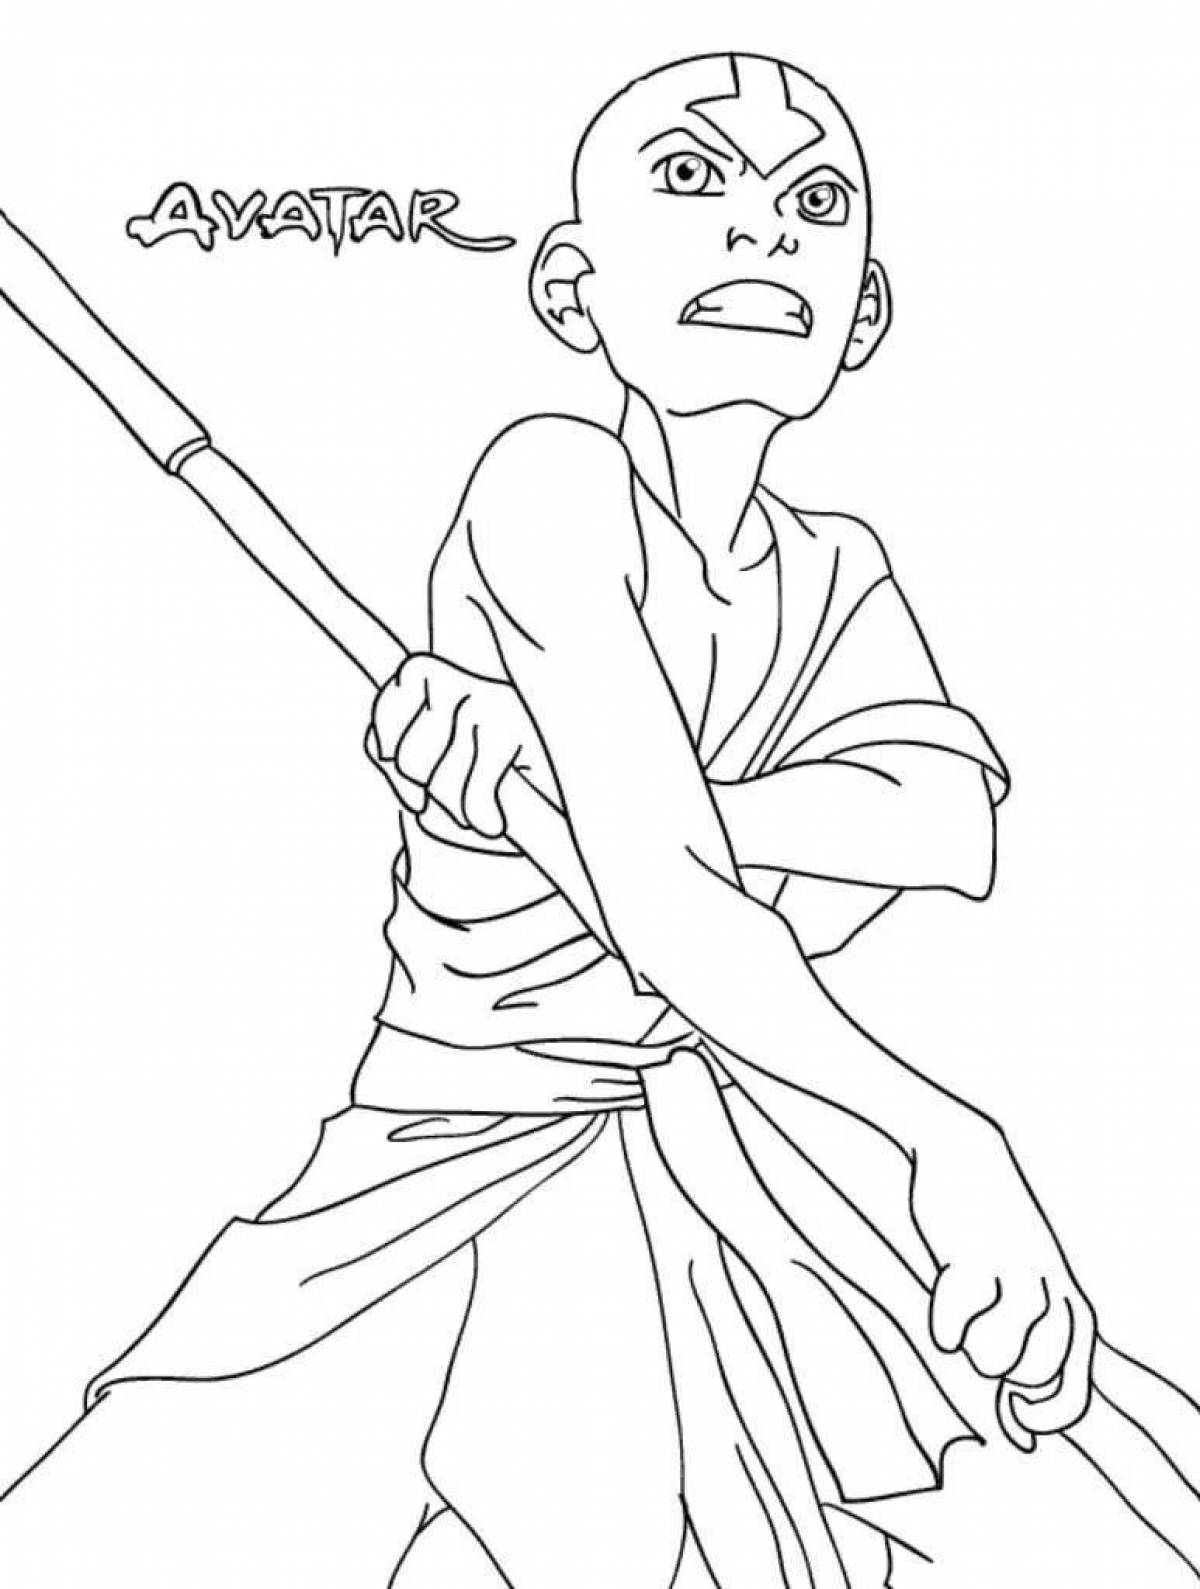 Magic Avatar: The Last Airbender Coloring Page